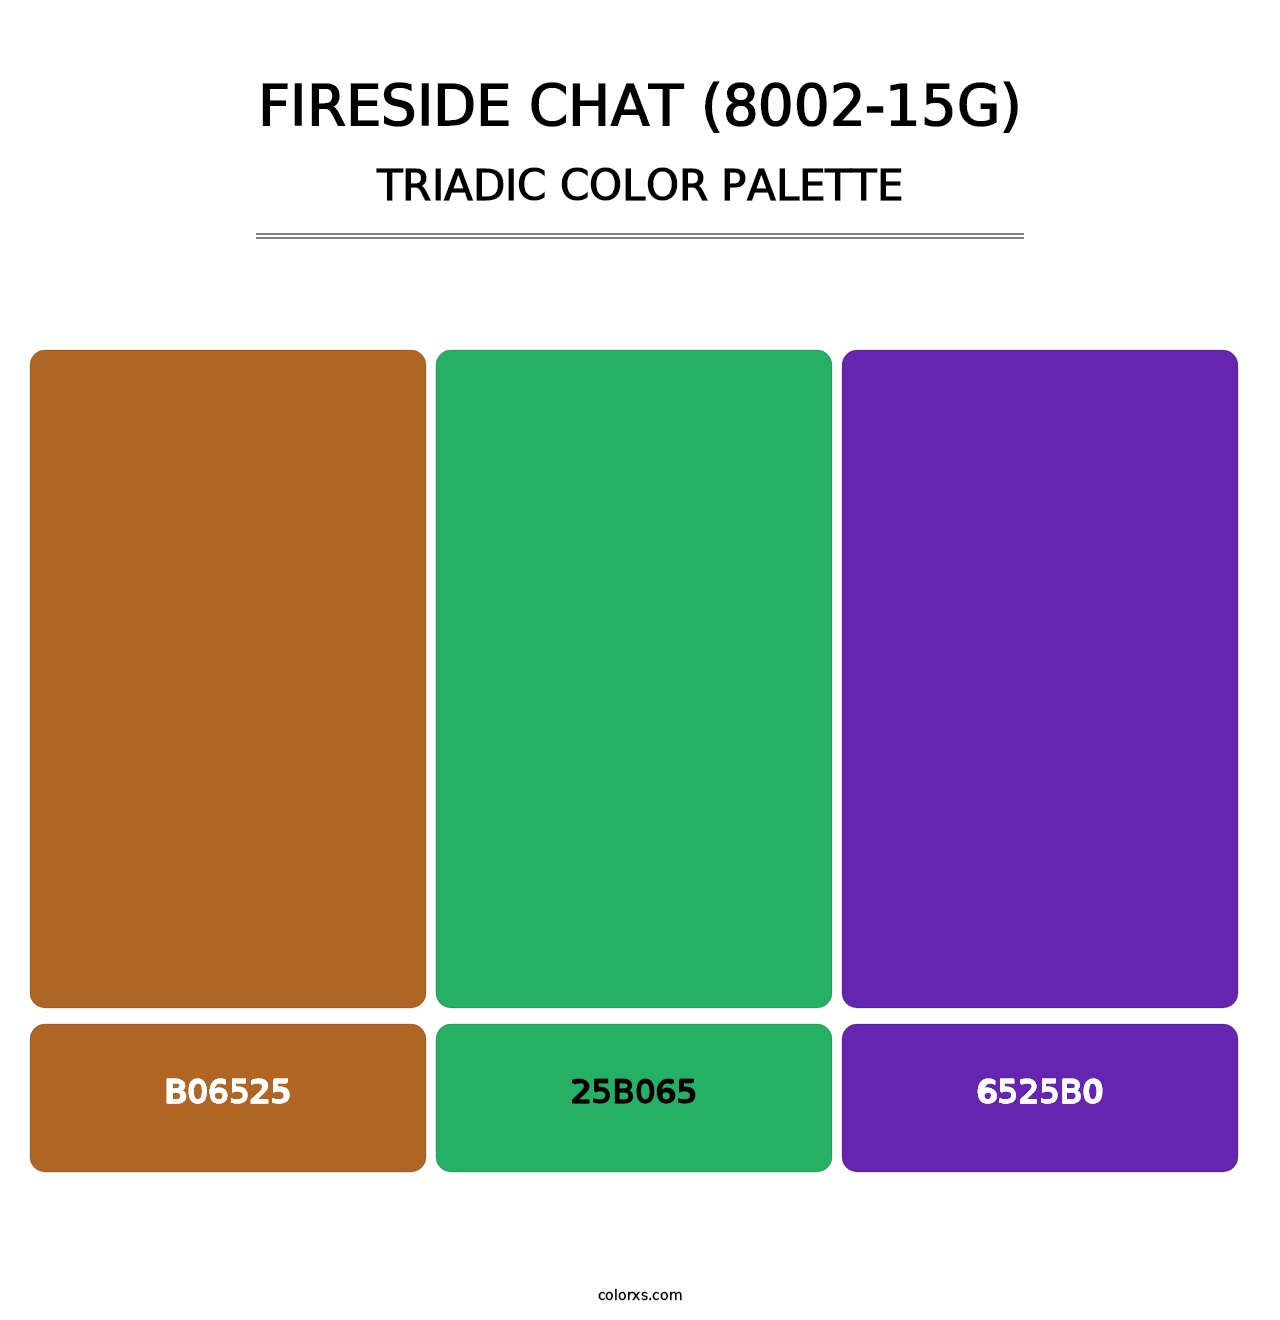 Fireside Chat (8002-15G) - Triadic Color Palette